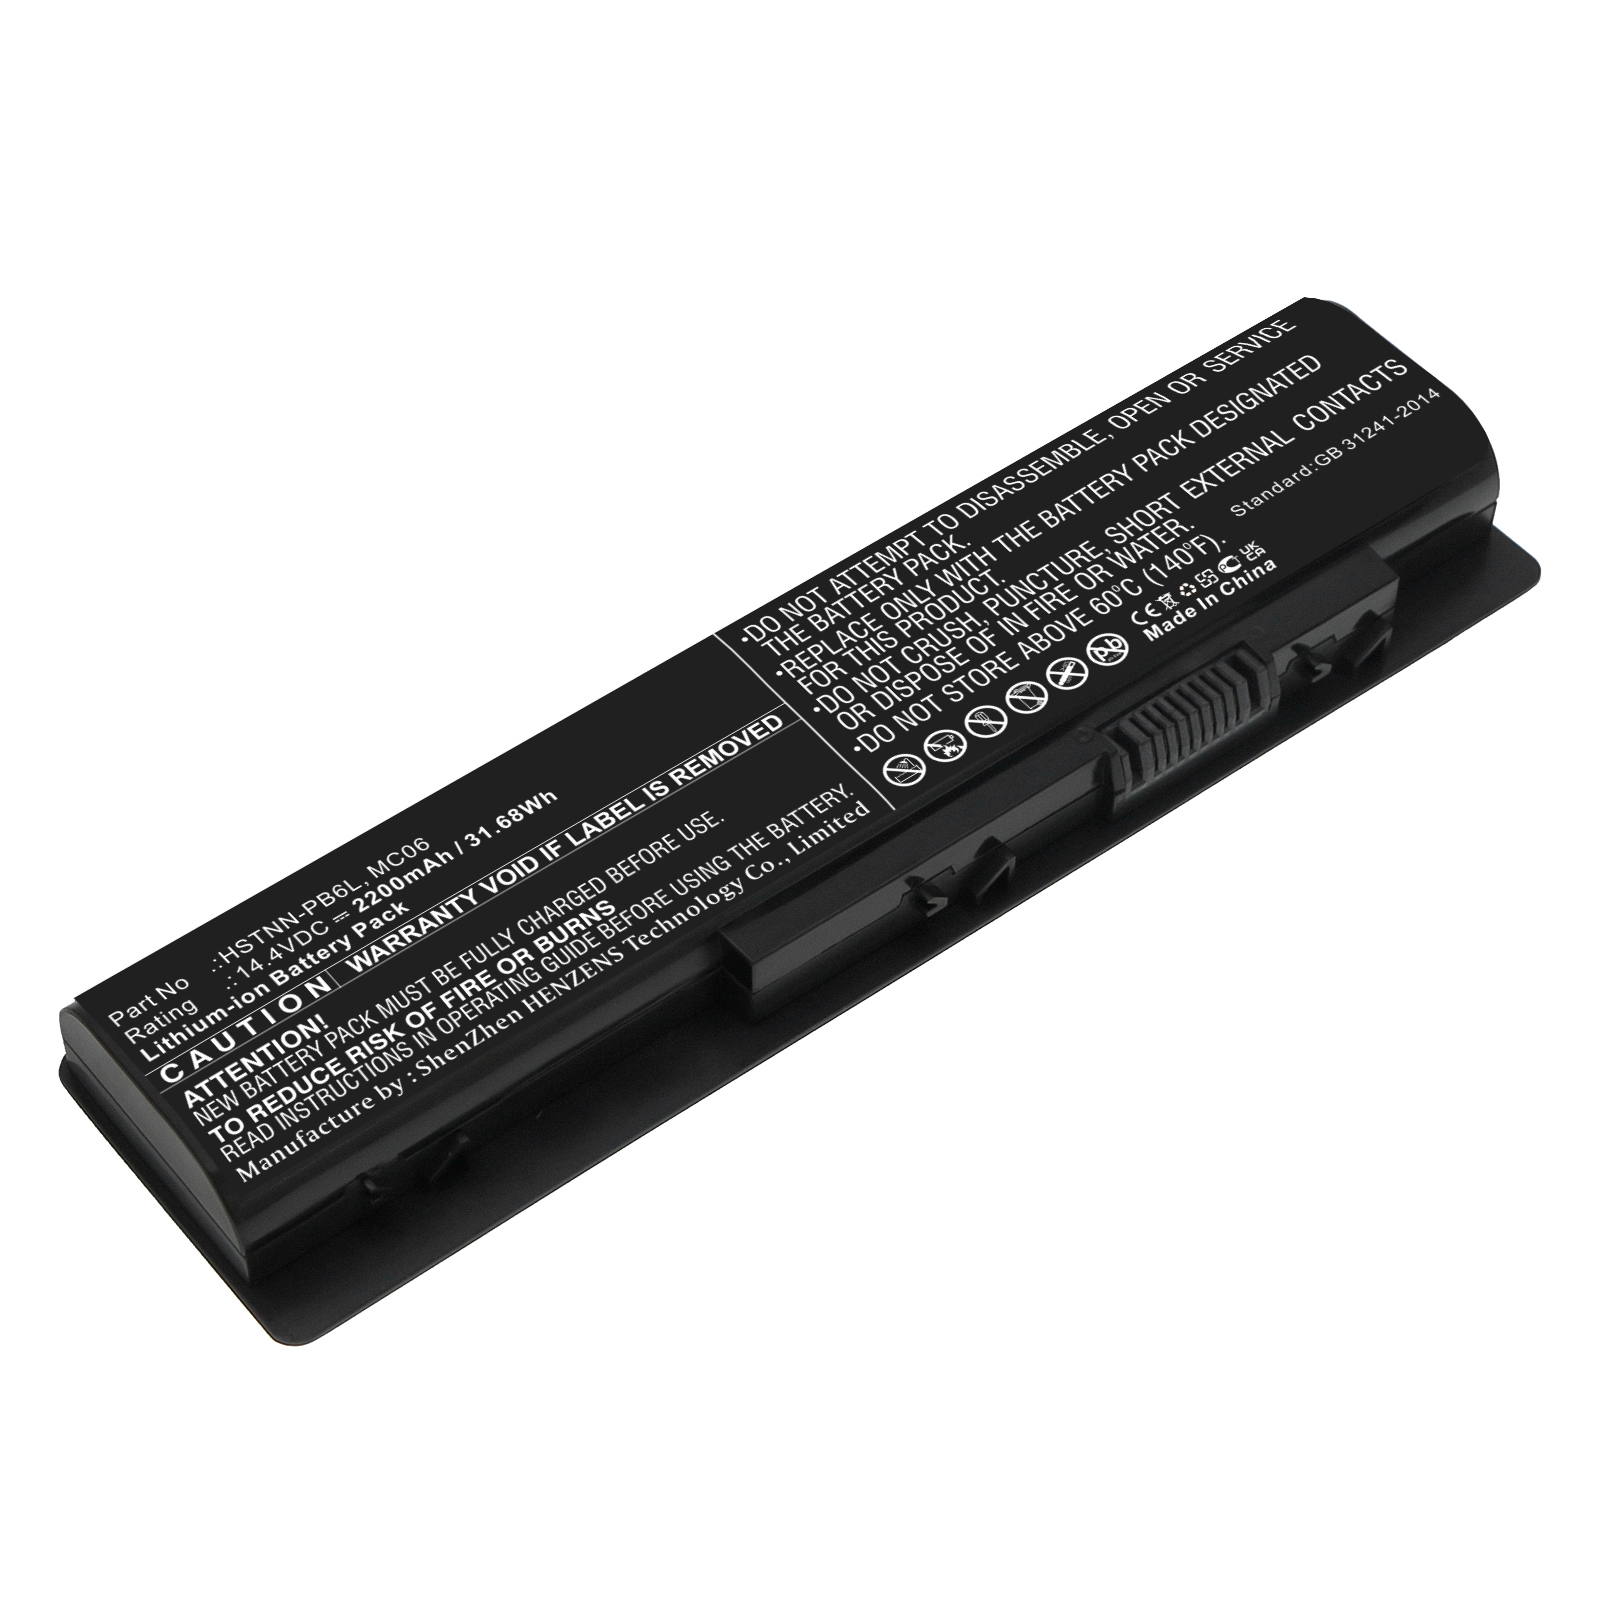 Synergy Digital Laptop Battery, Compatible with HP P4G73EA Laptop Battery (Li-ion, 14.4V, 2200mAh)